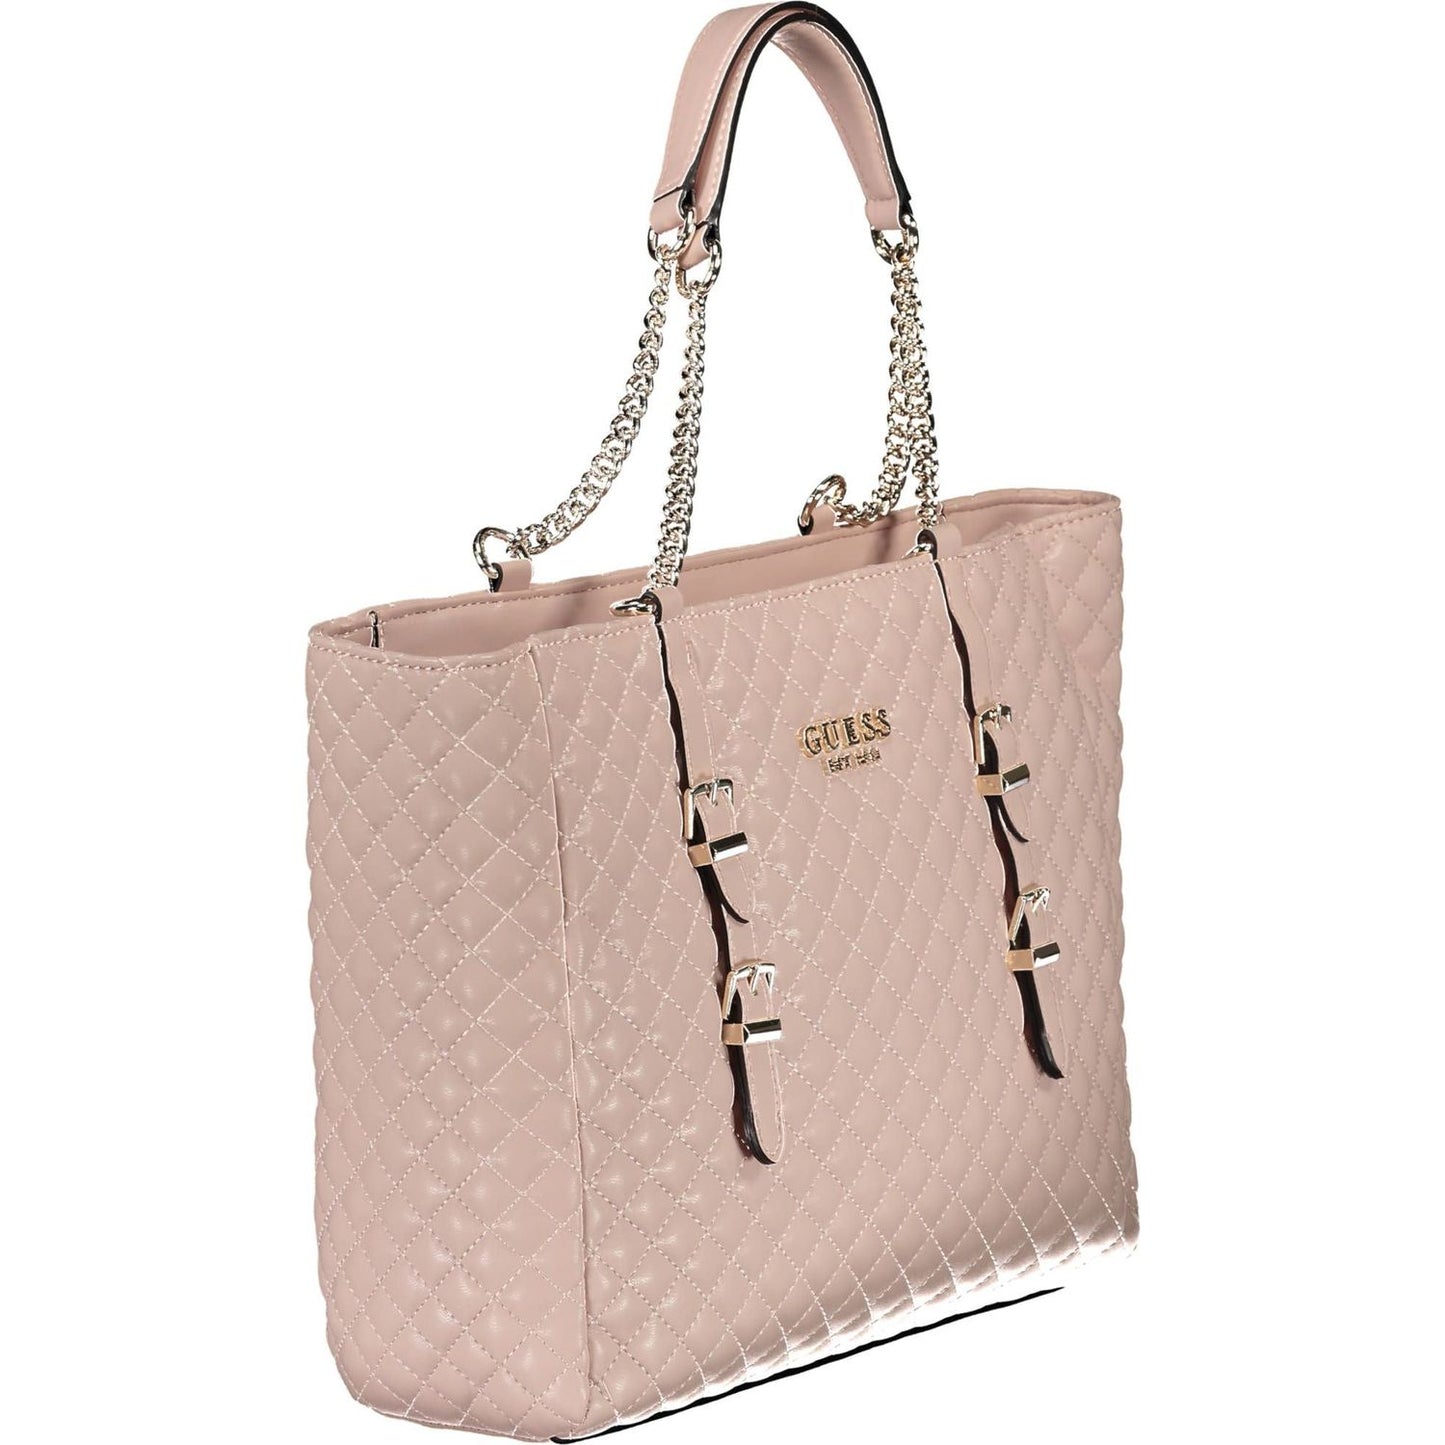 Guess Jeans Chic Pink Chain-Handle Shoulder Bag chic-pink-chain-handle-shoulder-bag-1